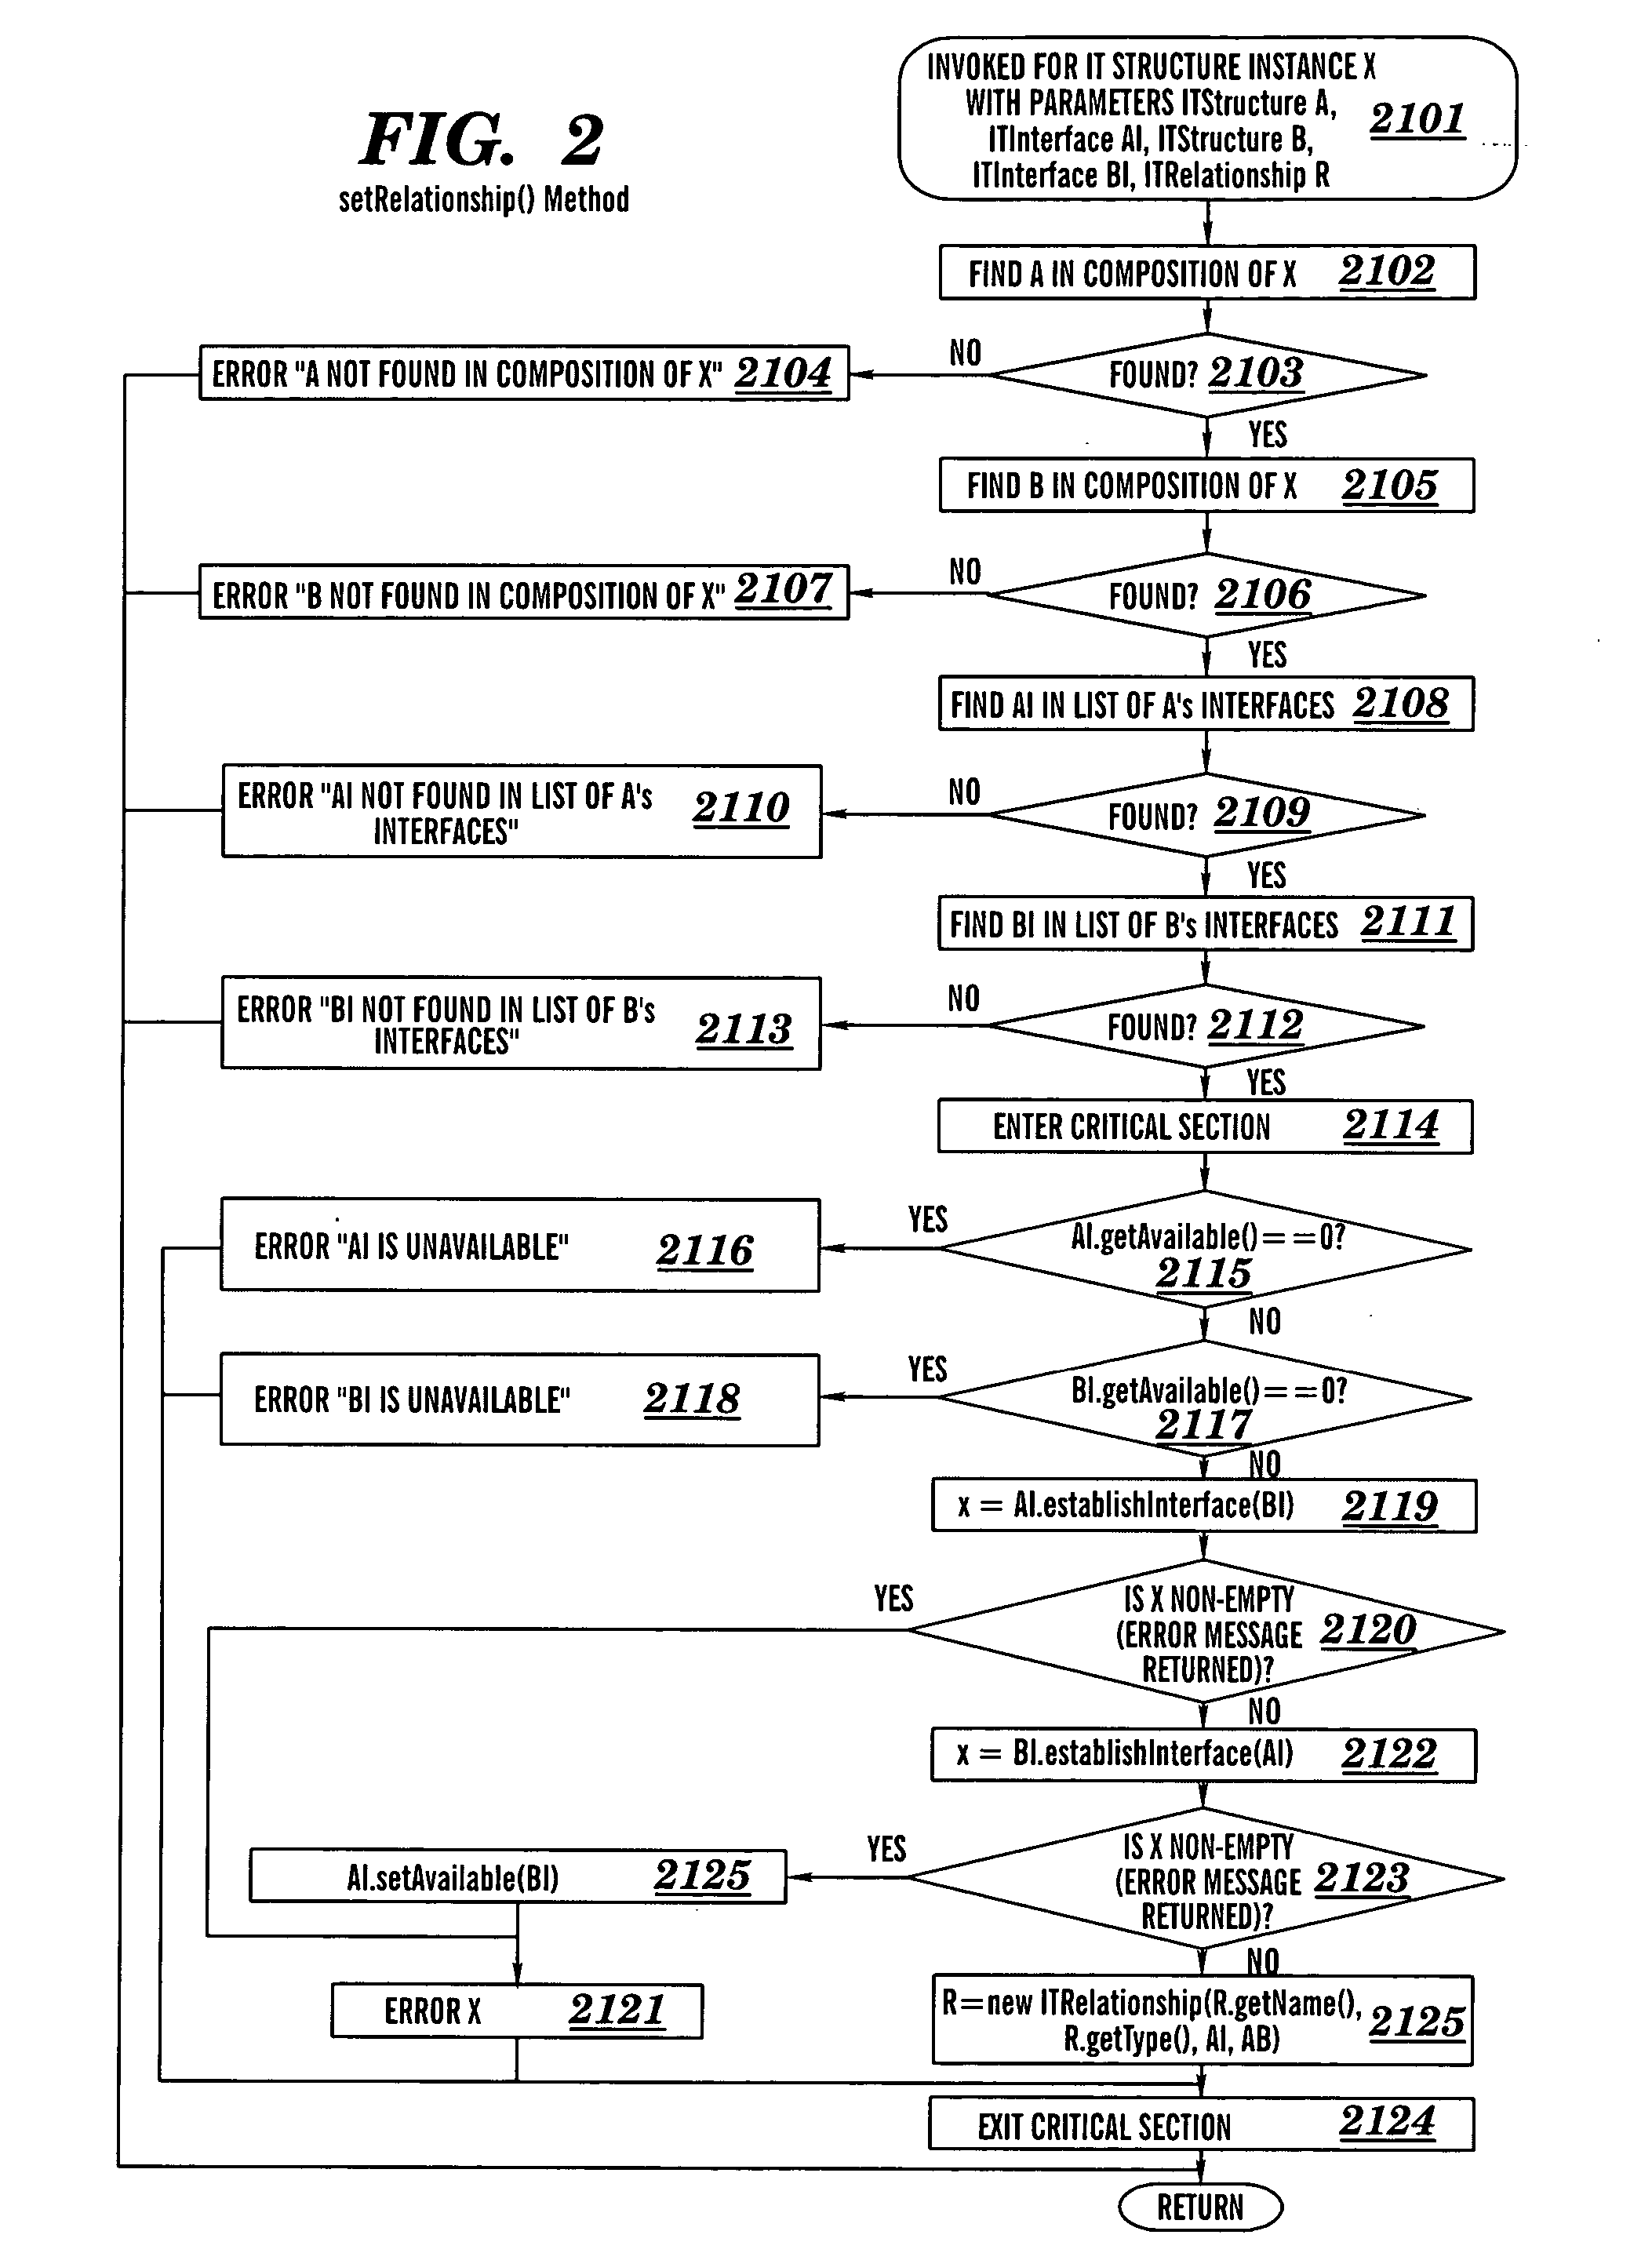 Automated display of an information technology system configuration